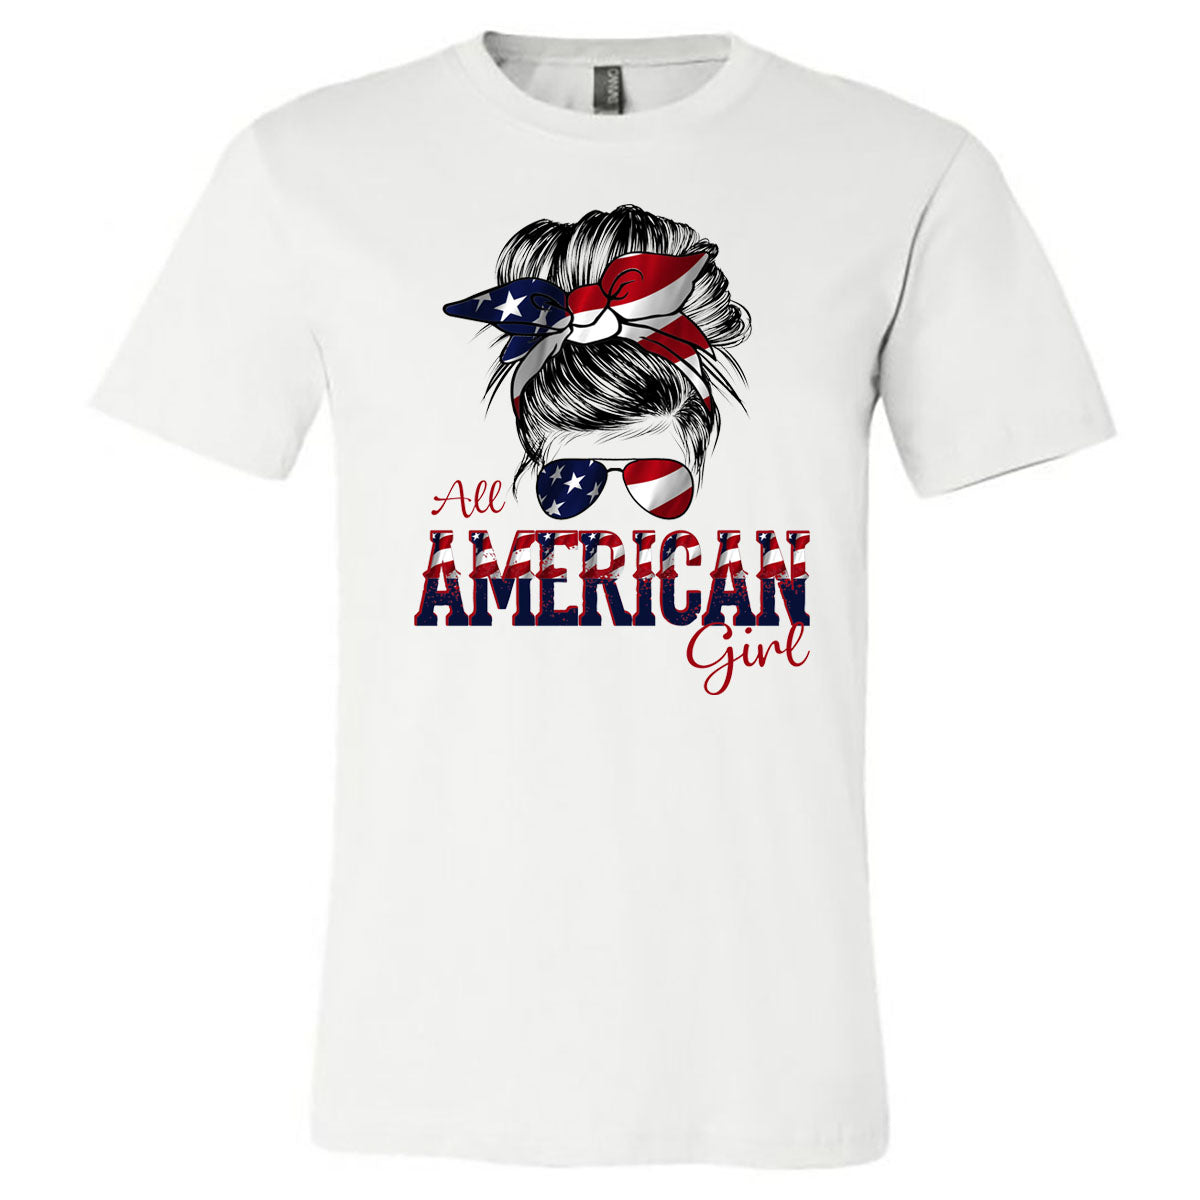 All American Girl - White Tee - Southern Grace Creations